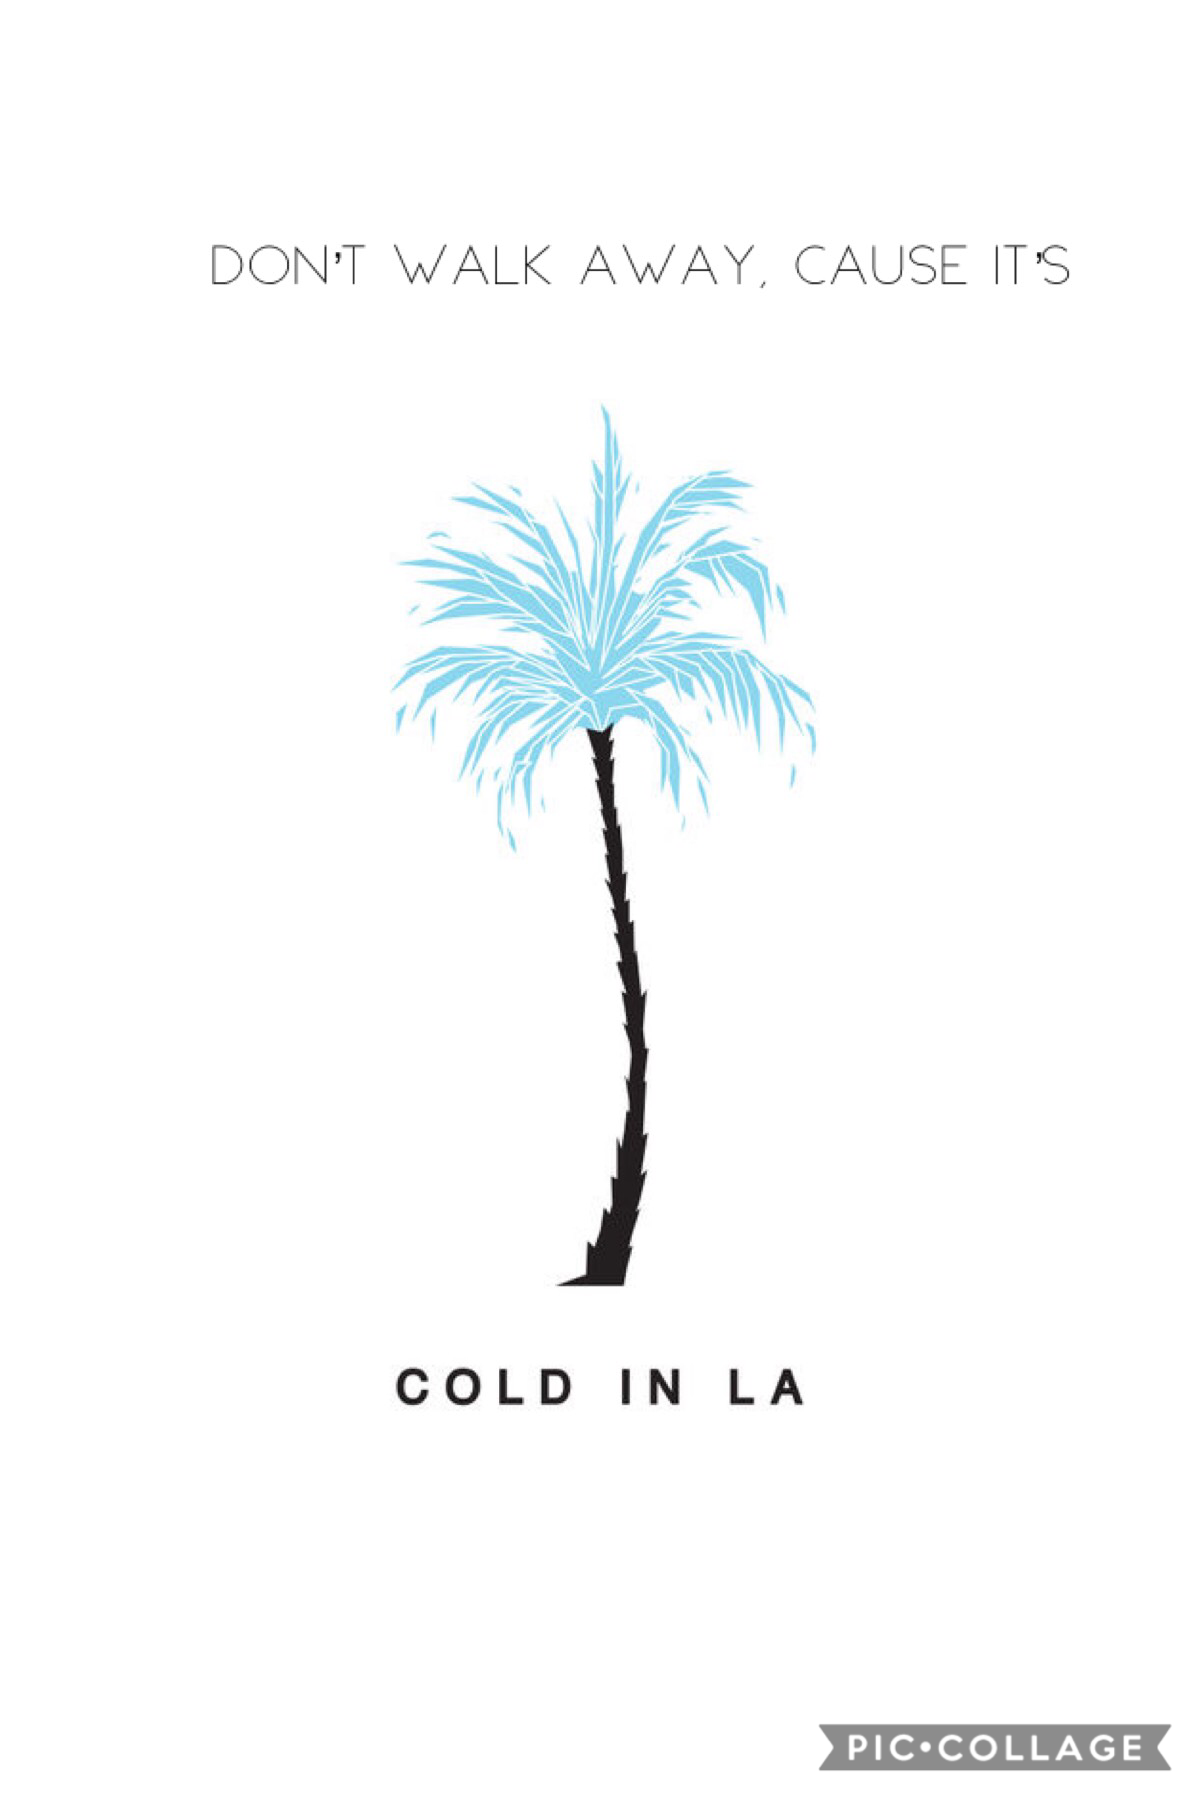 DID YALL LISTEN TO COLD IN LA?! ITS A MIGHTY BOP AND WE LOVE THAT ALL THE BOYS AND ONLY THE BOYS WROTE THE SONG⚫️💜💙